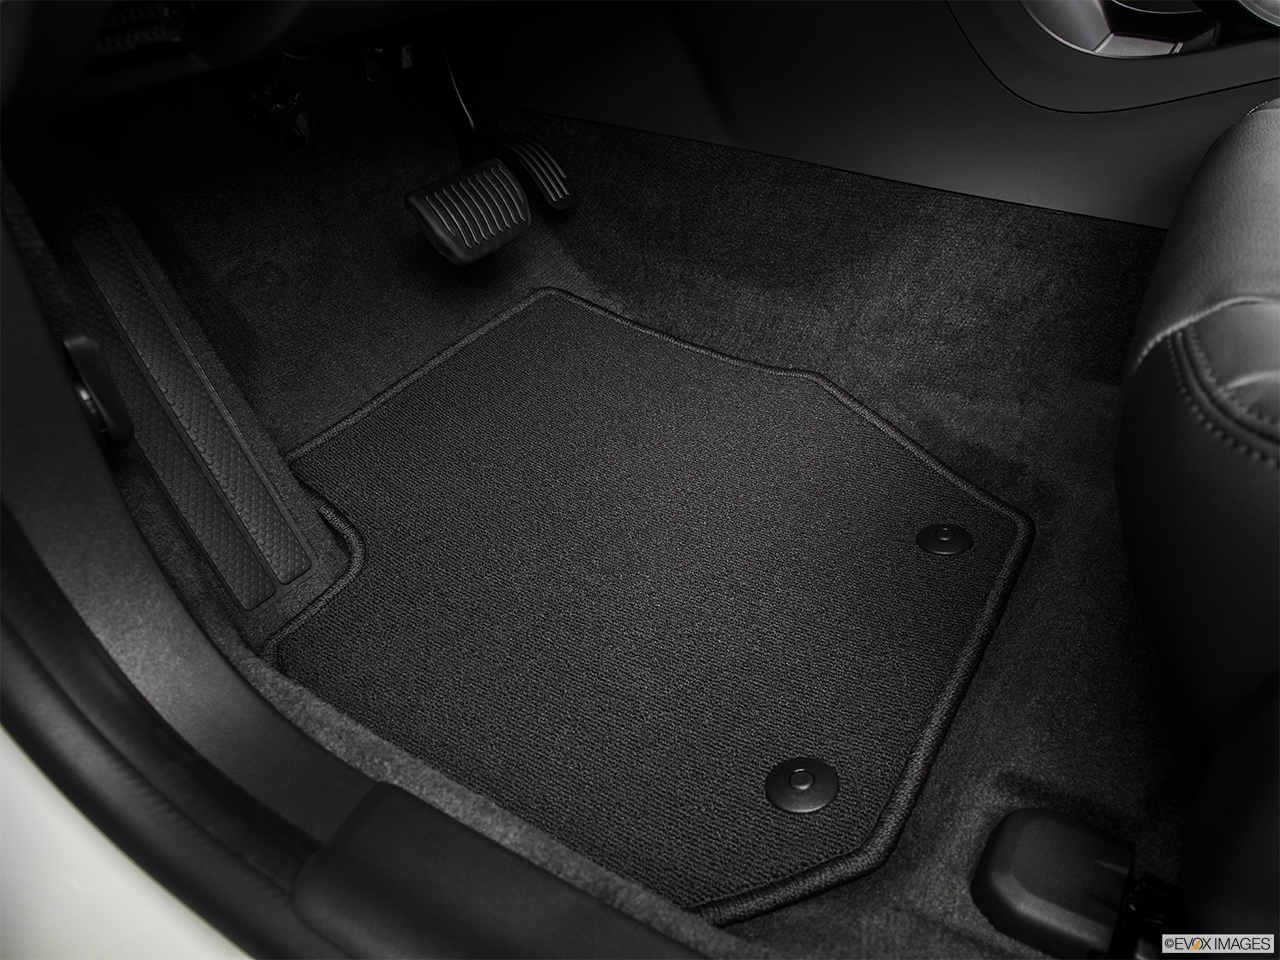 2015 Volvo V60 Premier Plus Driver's floor mat and pedals. Mid-seat level from outside looking in. 